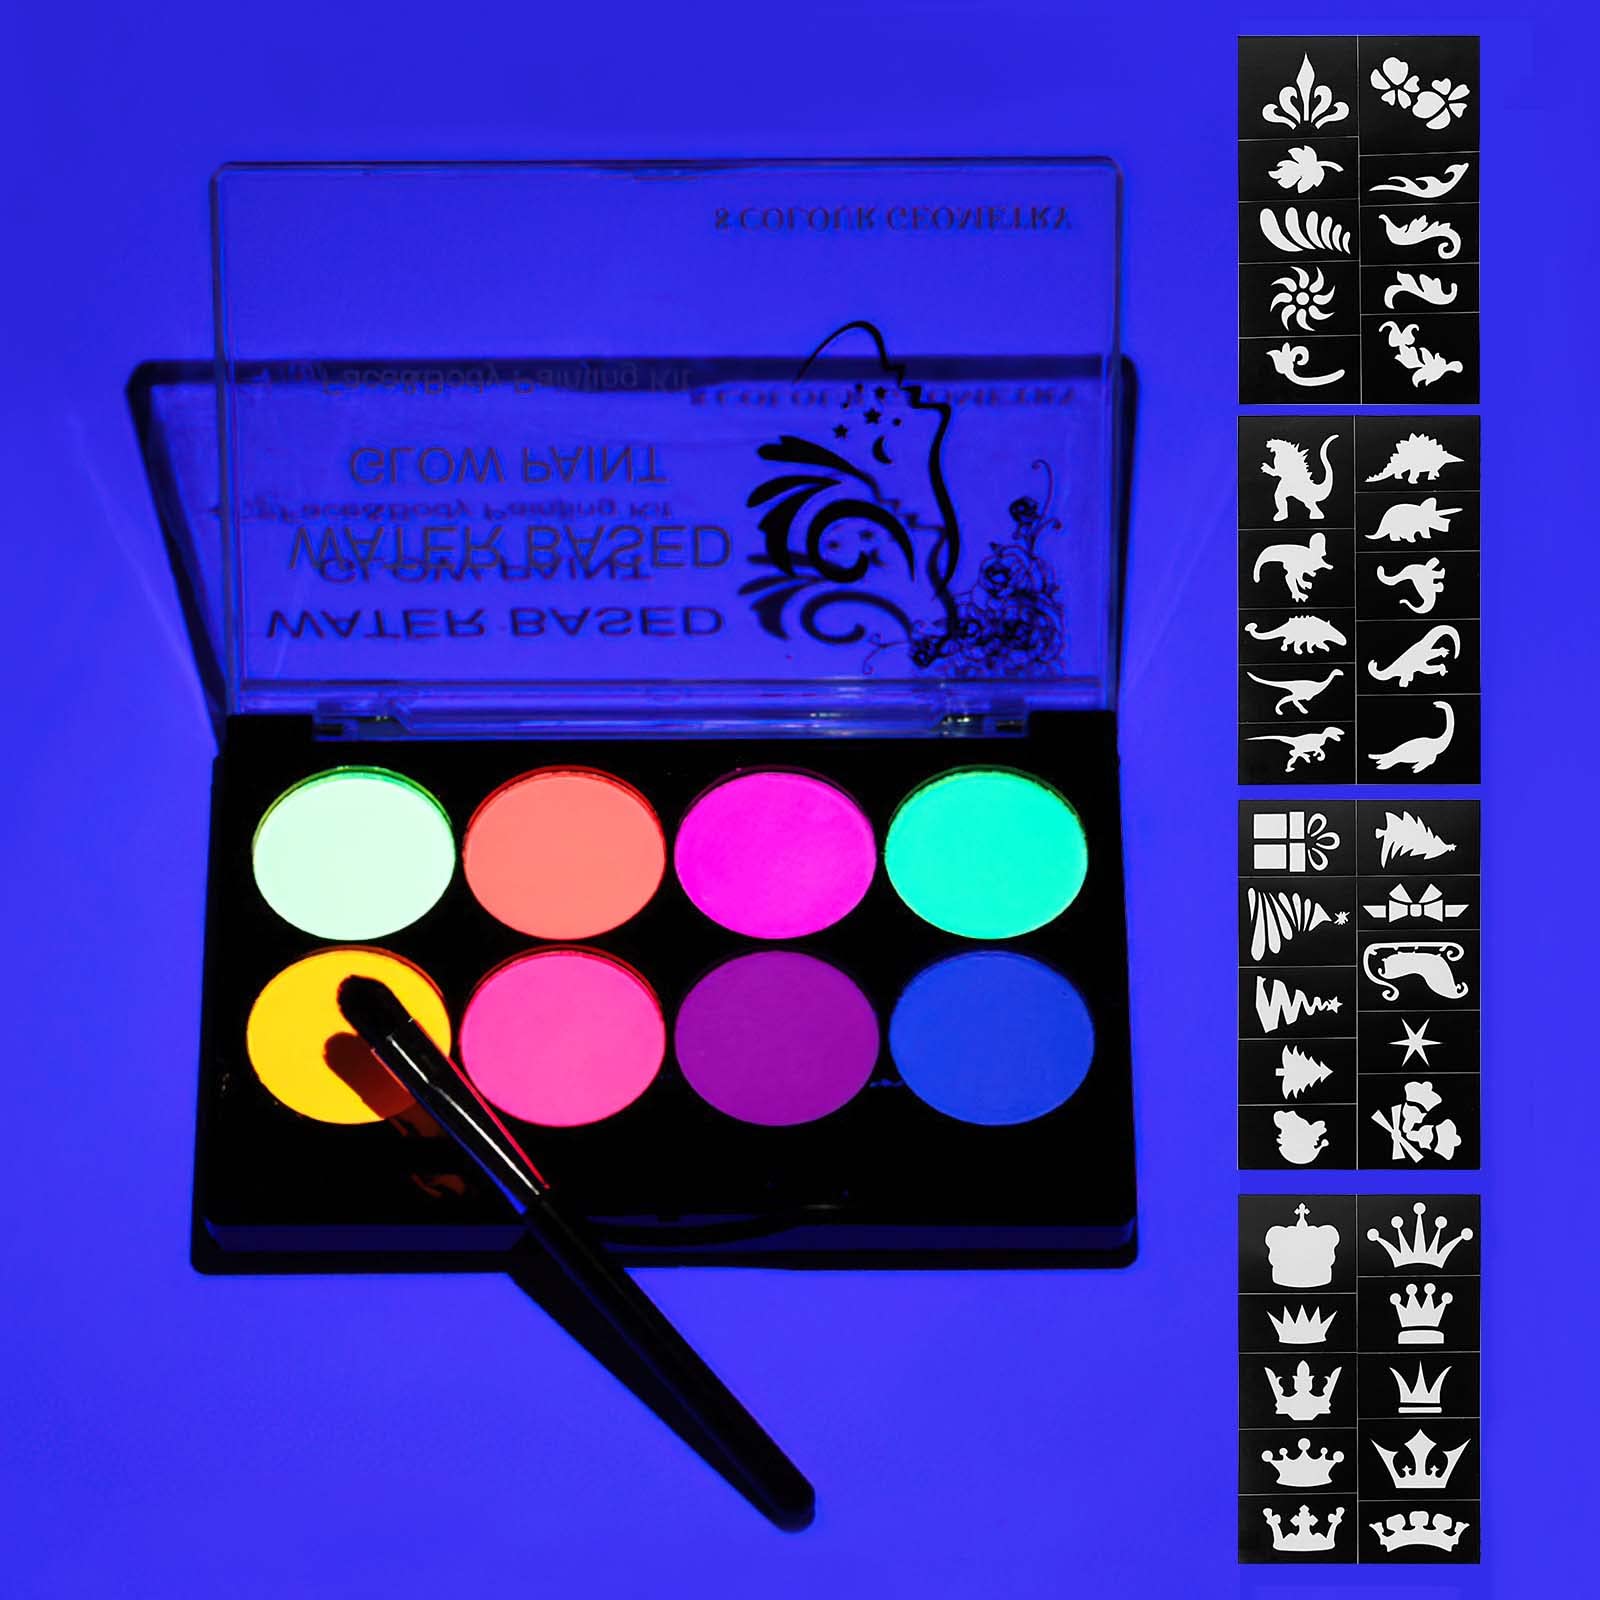 Neon-Face-Paint Nontoxic-and-Washable-Neon-Body-Paint UV-Glow-Paint-in  the-Black-Light-with-Brush-and-Mode-Cards  Glow-in-the-Dark-Paint-for-Halloween-Festivals-Party-Cosplay-Chritsmas  8-Vibrant-Colors